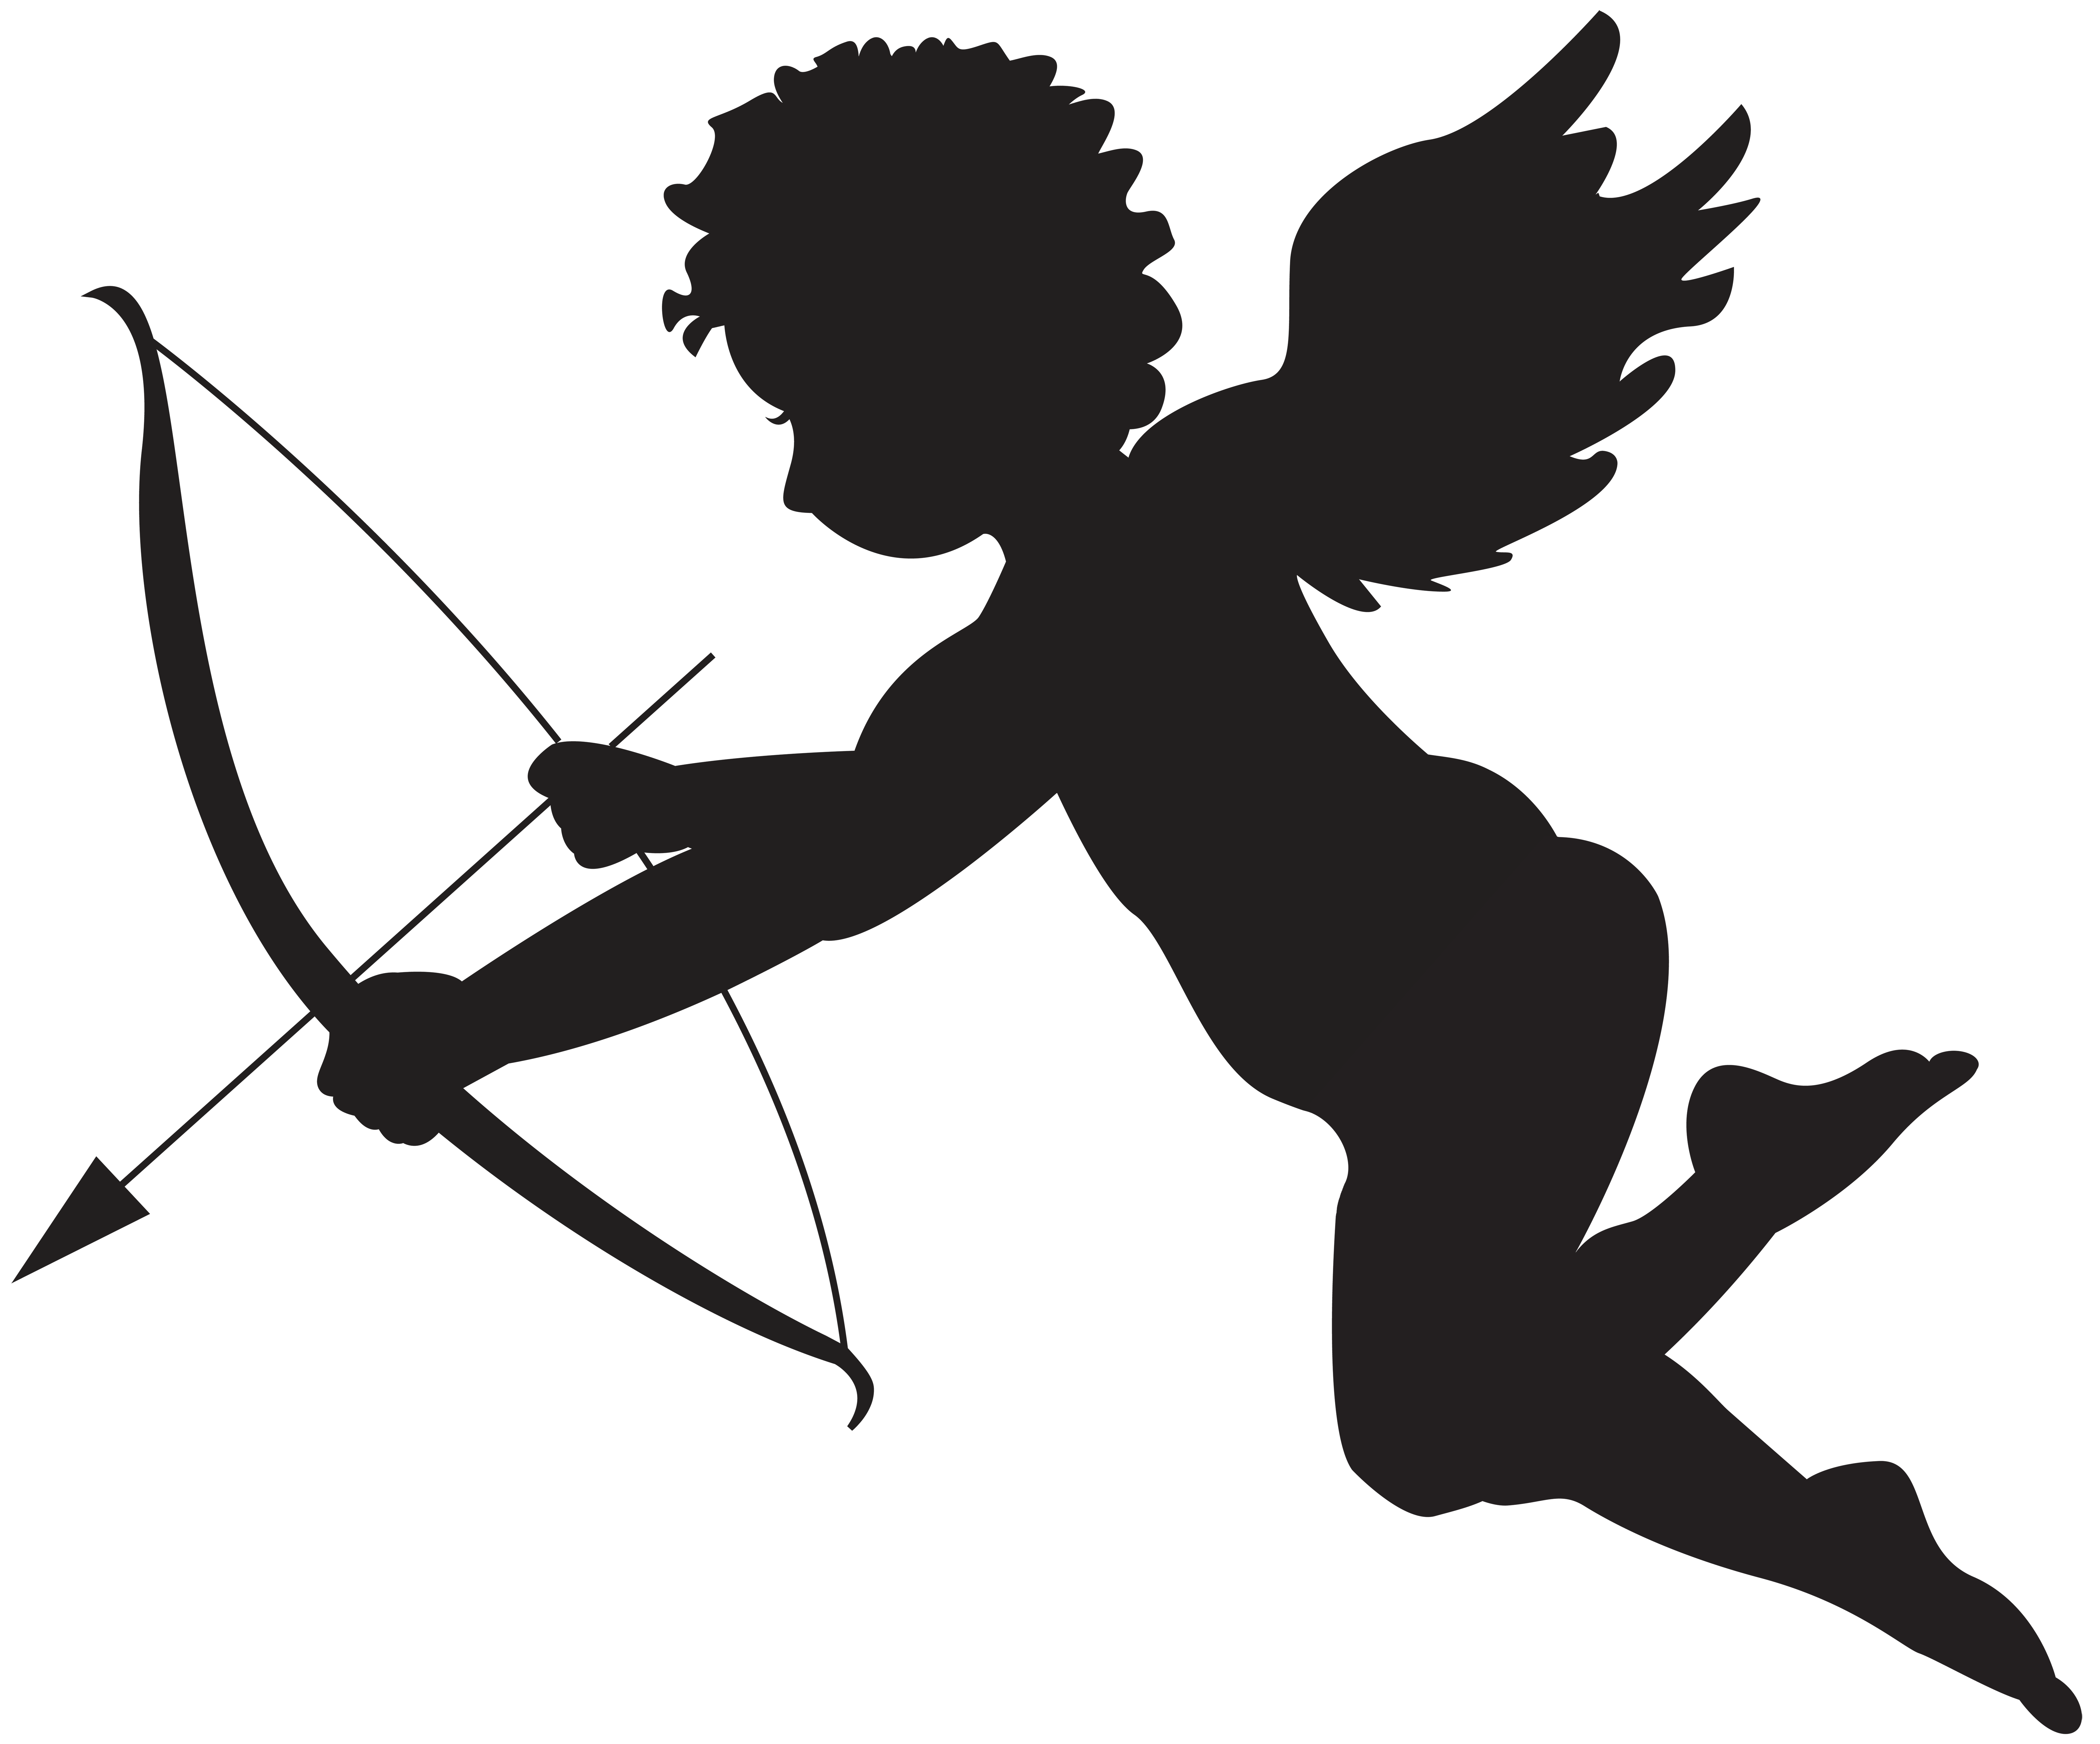 cupid clipart banner